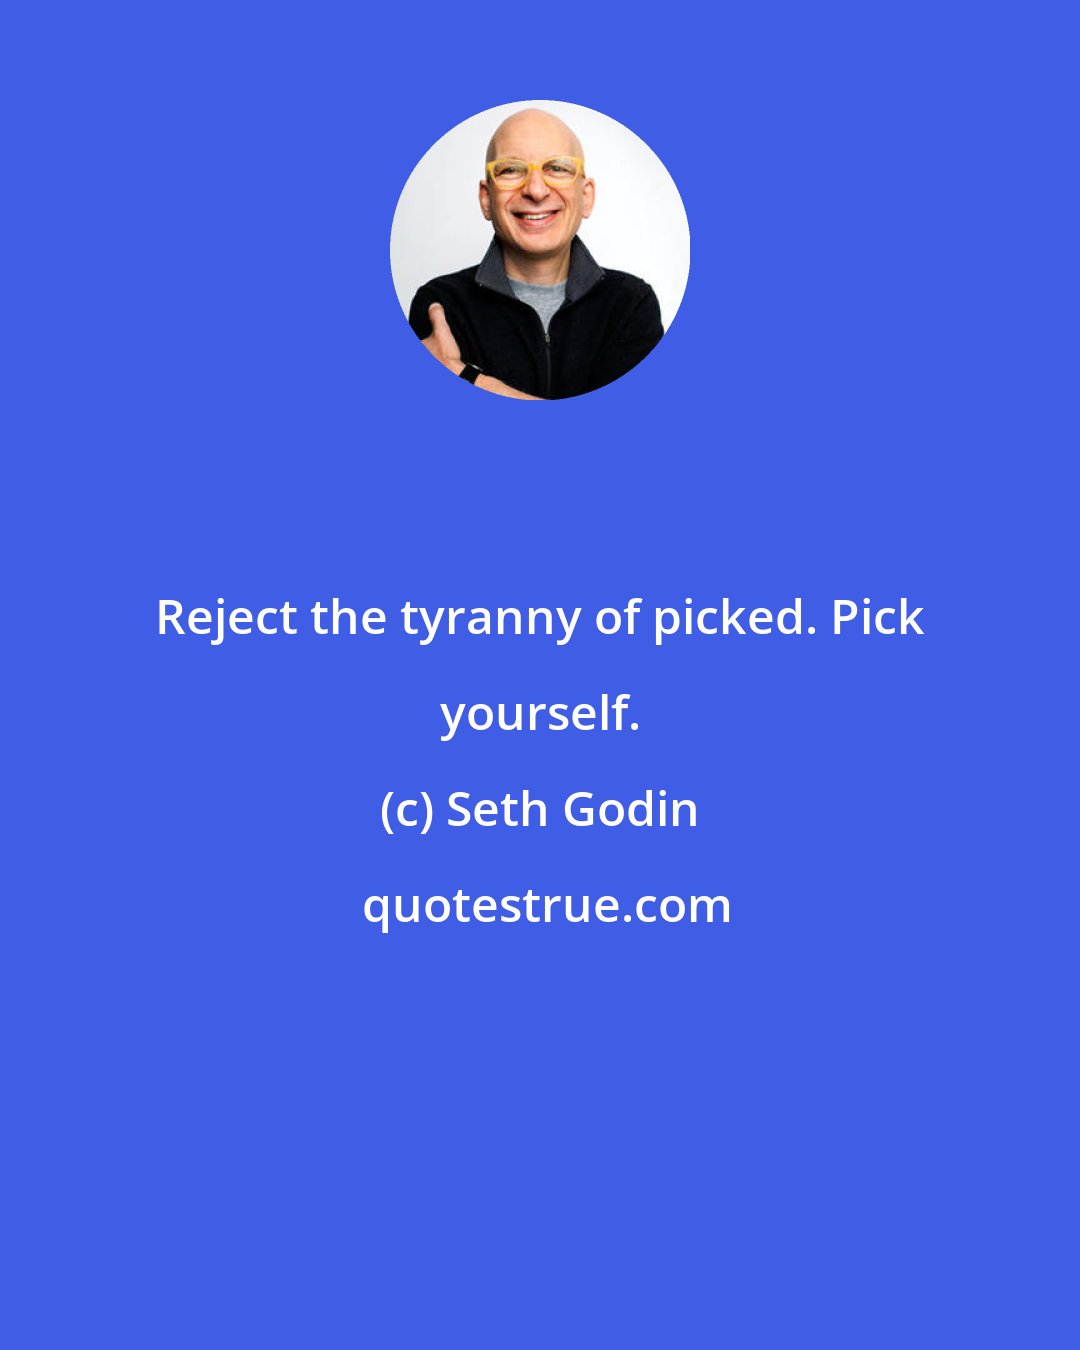 Seth Godin: Reject the tyranny of picked. Pick yourself.